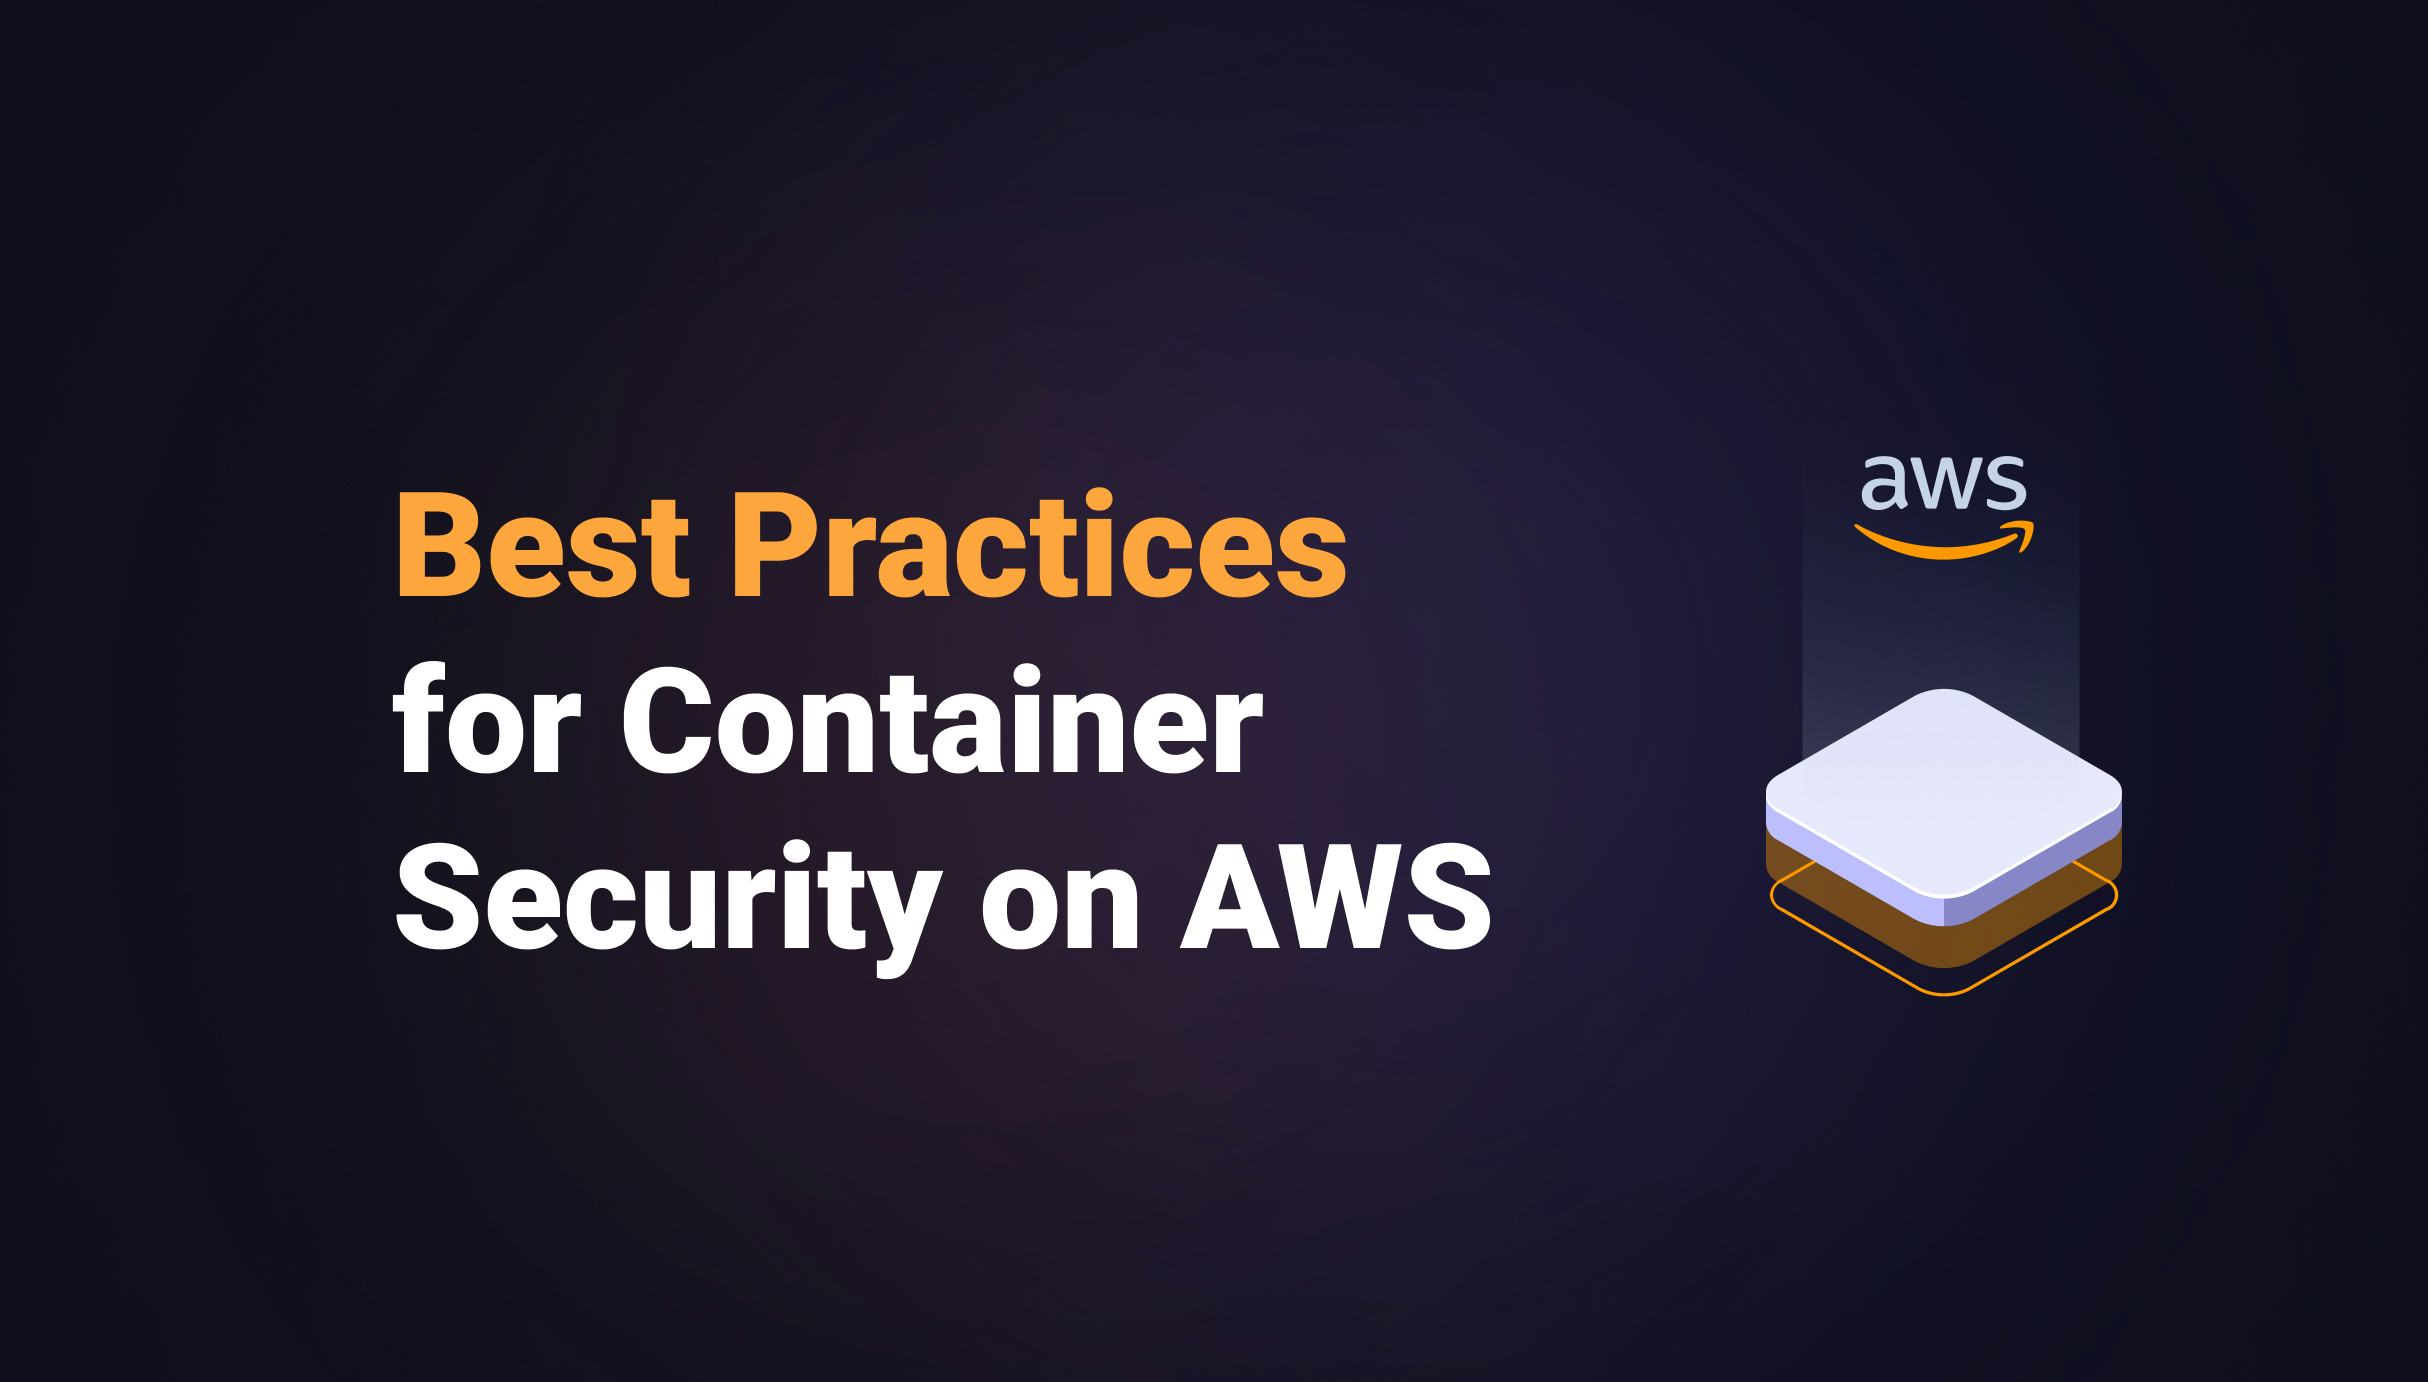 Best Practices for Container Security on AWS